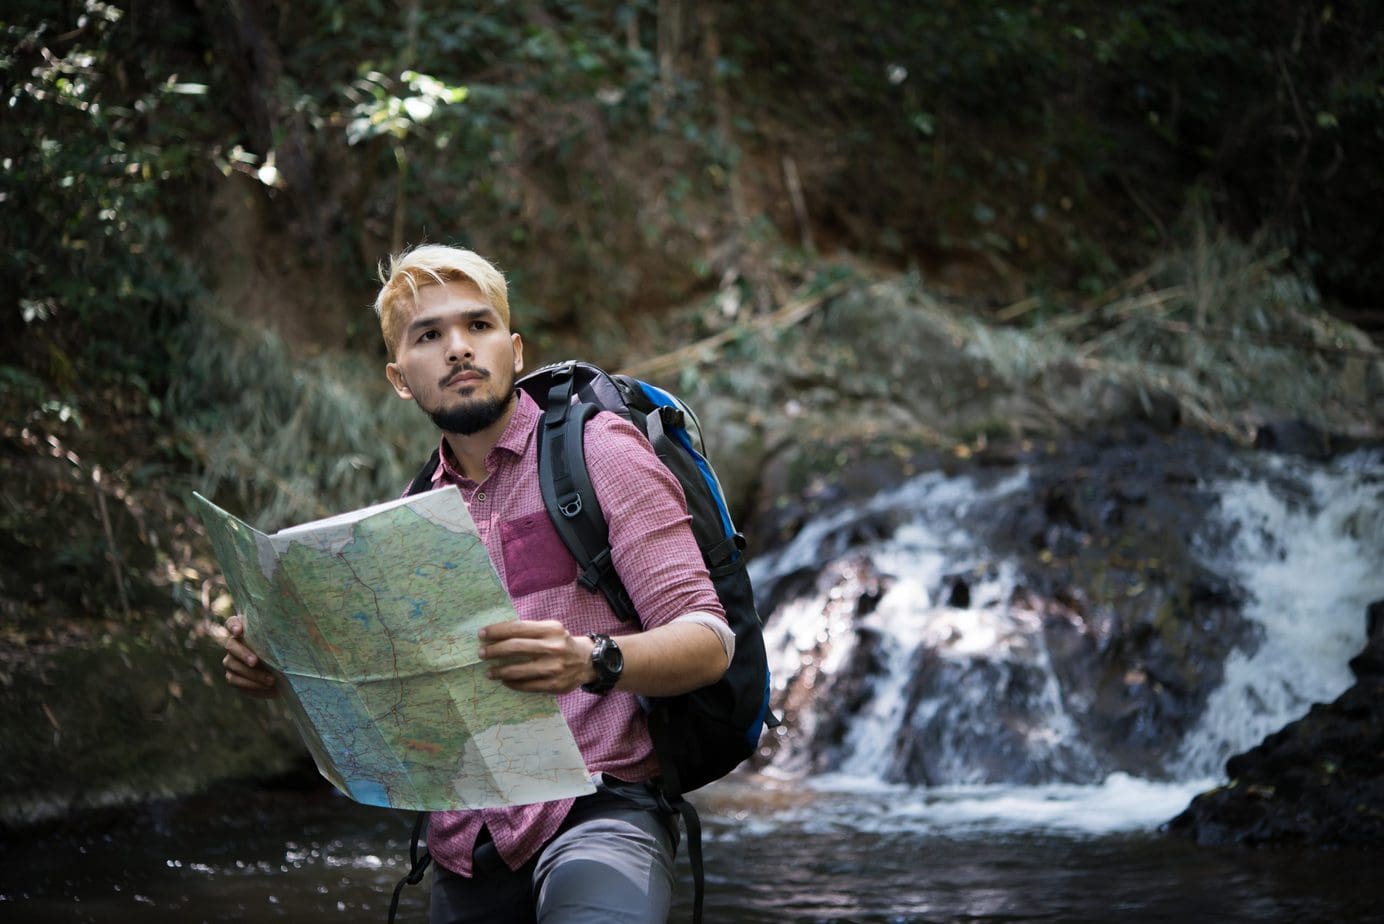 Orientation in the field is essential. Check how to use a map and compass properly!